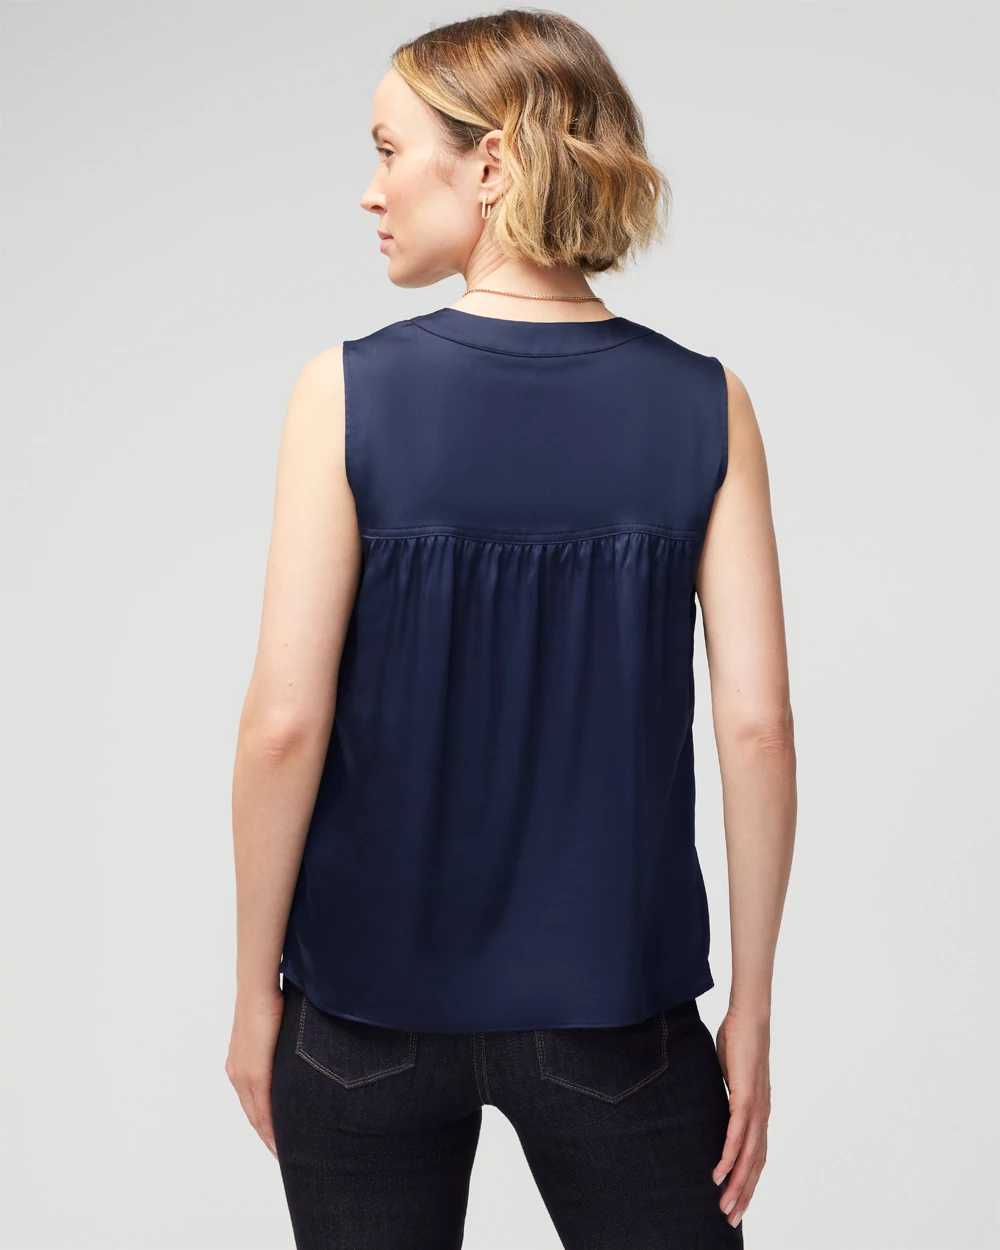 Sleeveless Topstitch Shell Top click to view larger image.